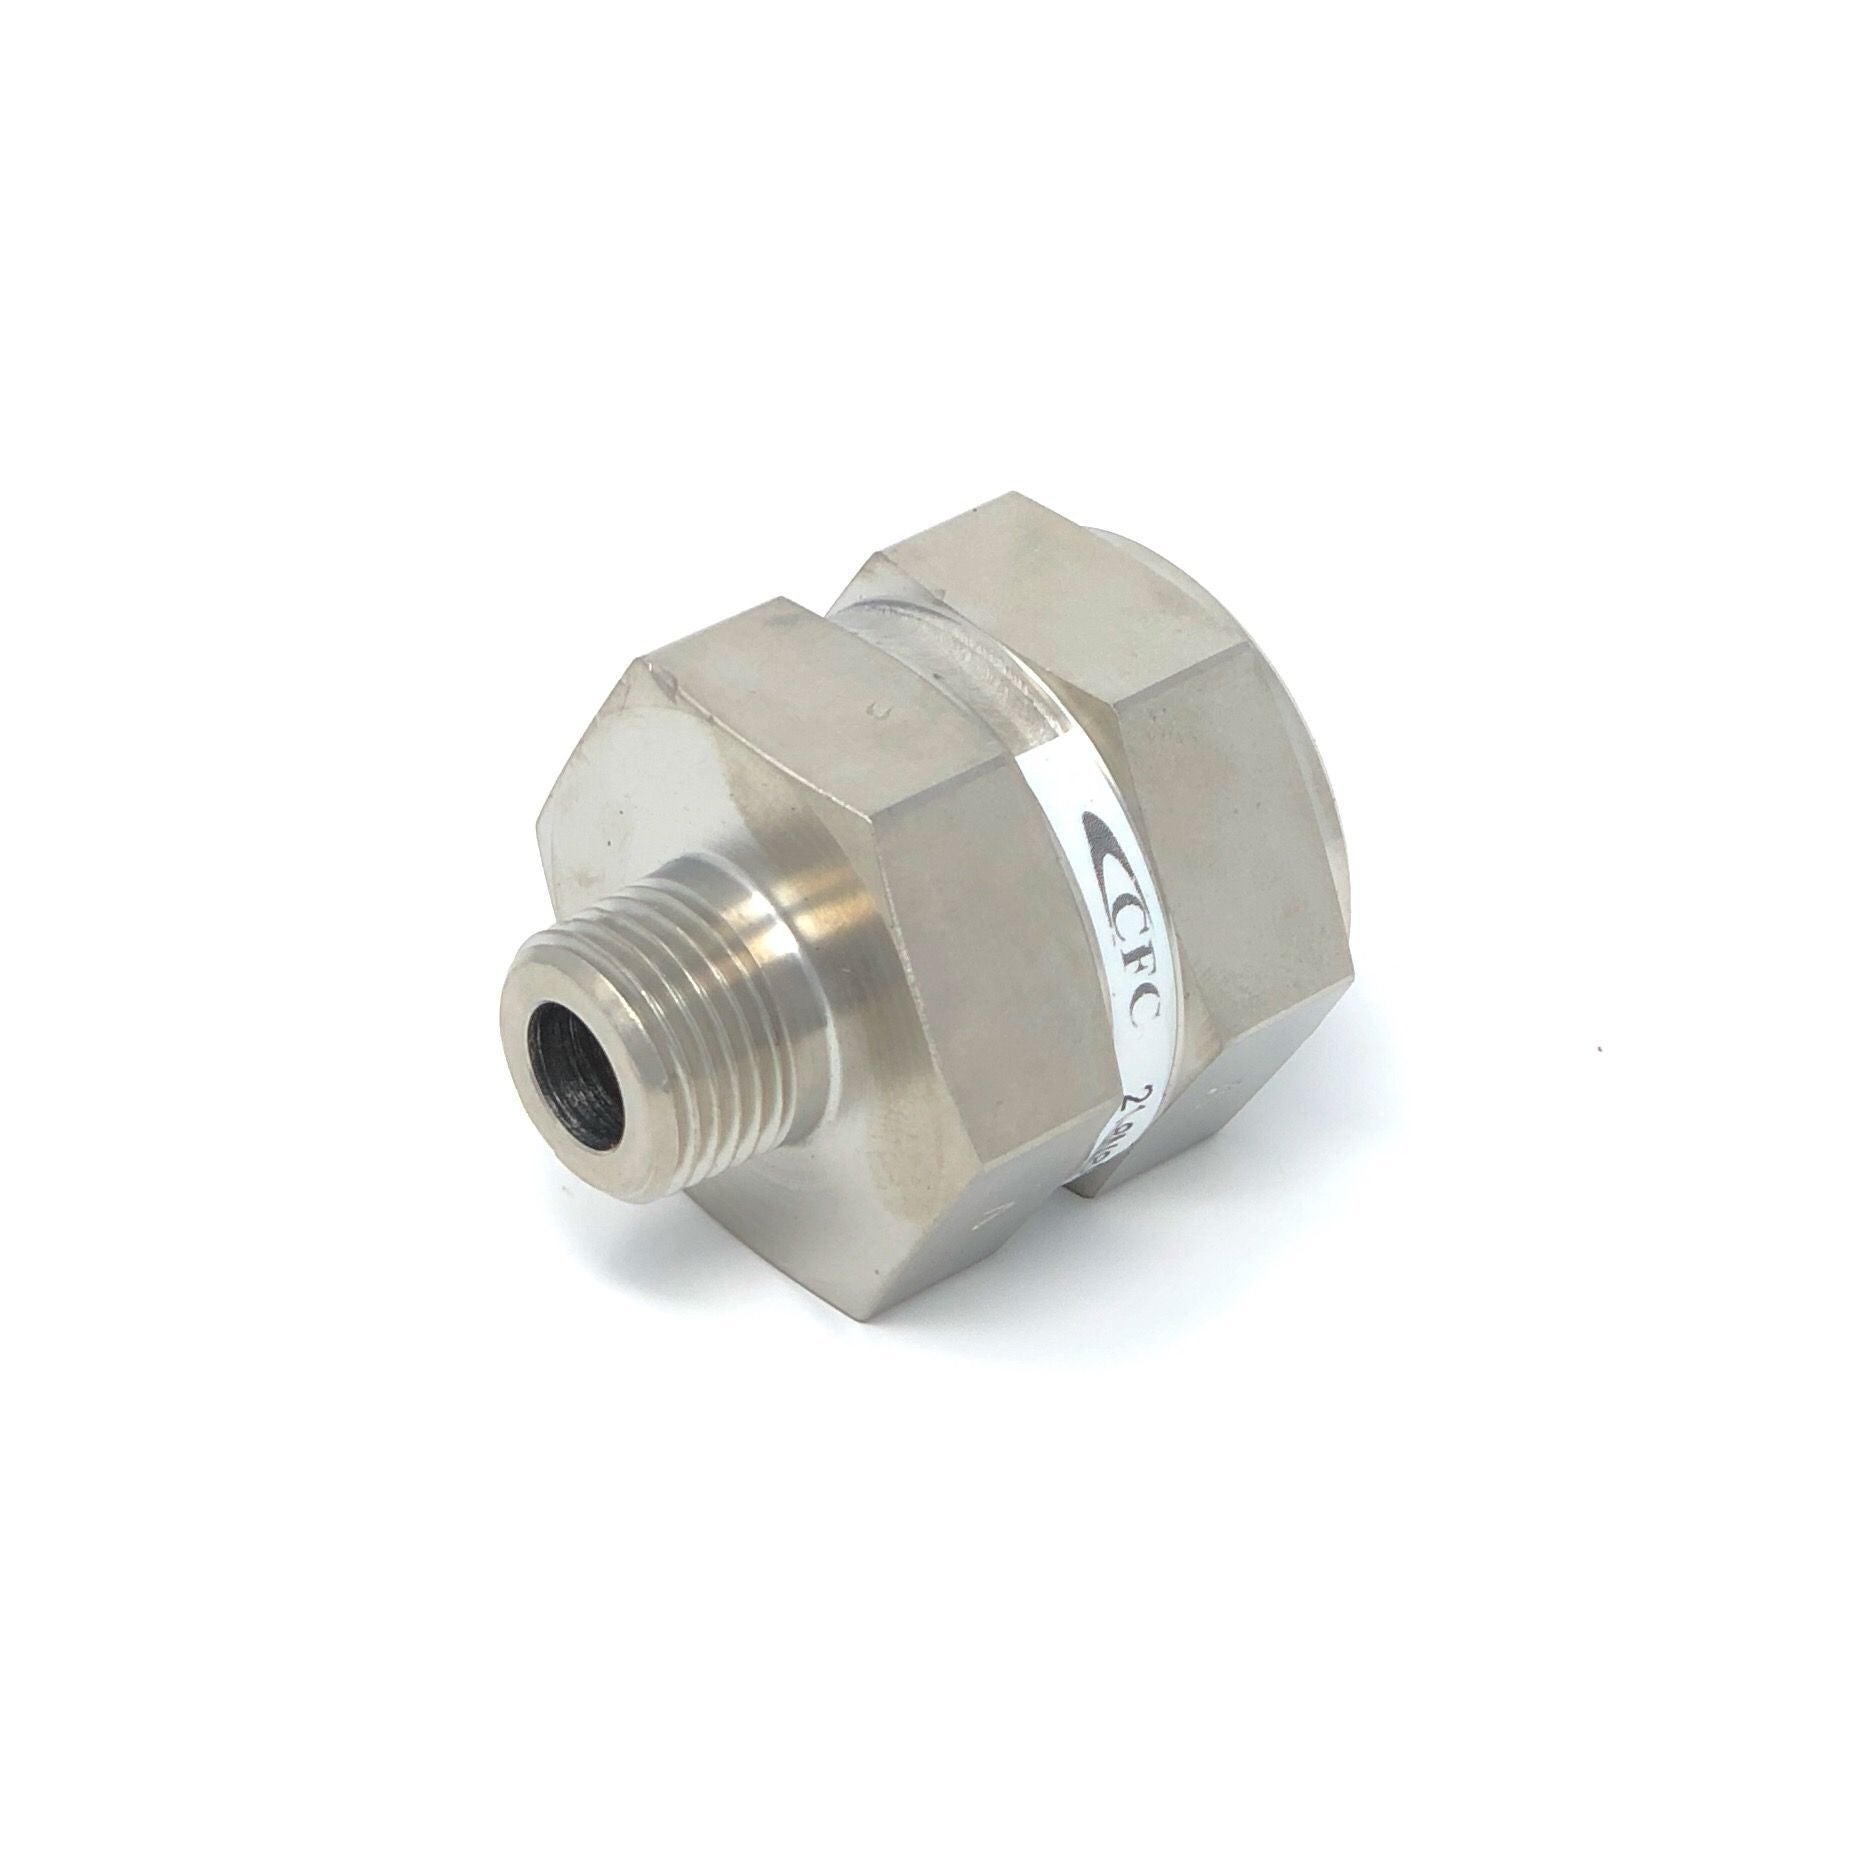 21-6P6P-100S : Chase High Pressure Inline Filter, 6000psi, 3/8" NPT, 100 Micron, No Visual Indicator, No Bypass